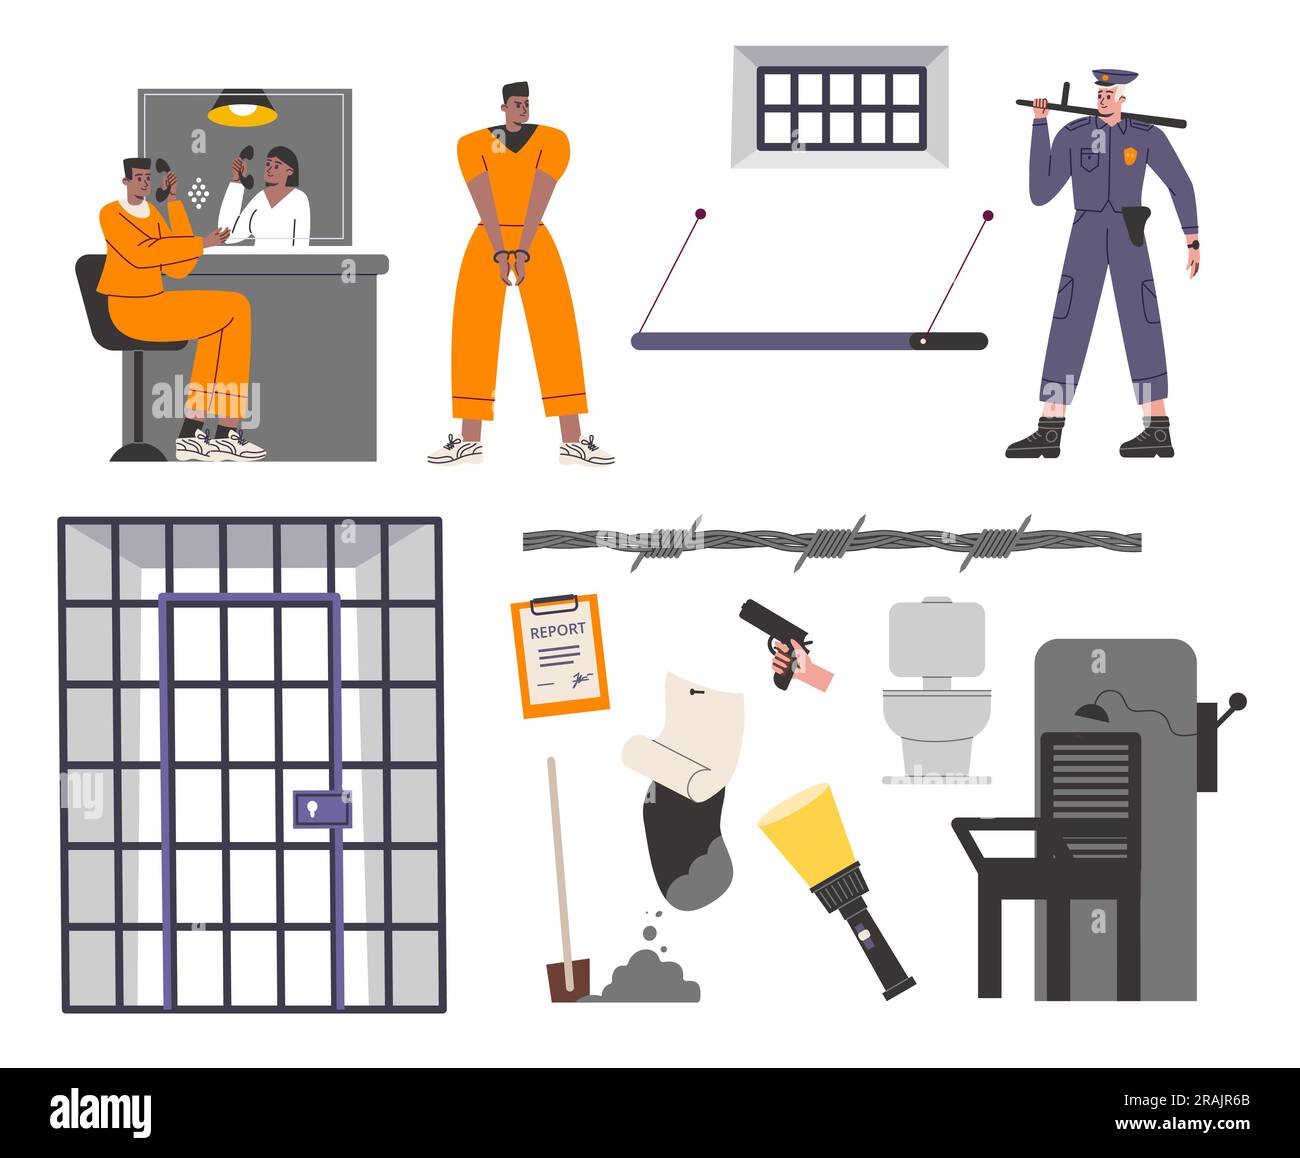 Prison elements. Cartoon prisoners in overalls and handcuffed. Cell with bars. Dating room. Barbed wire. Electric chair. Jailhouse cage objects Stock Vector